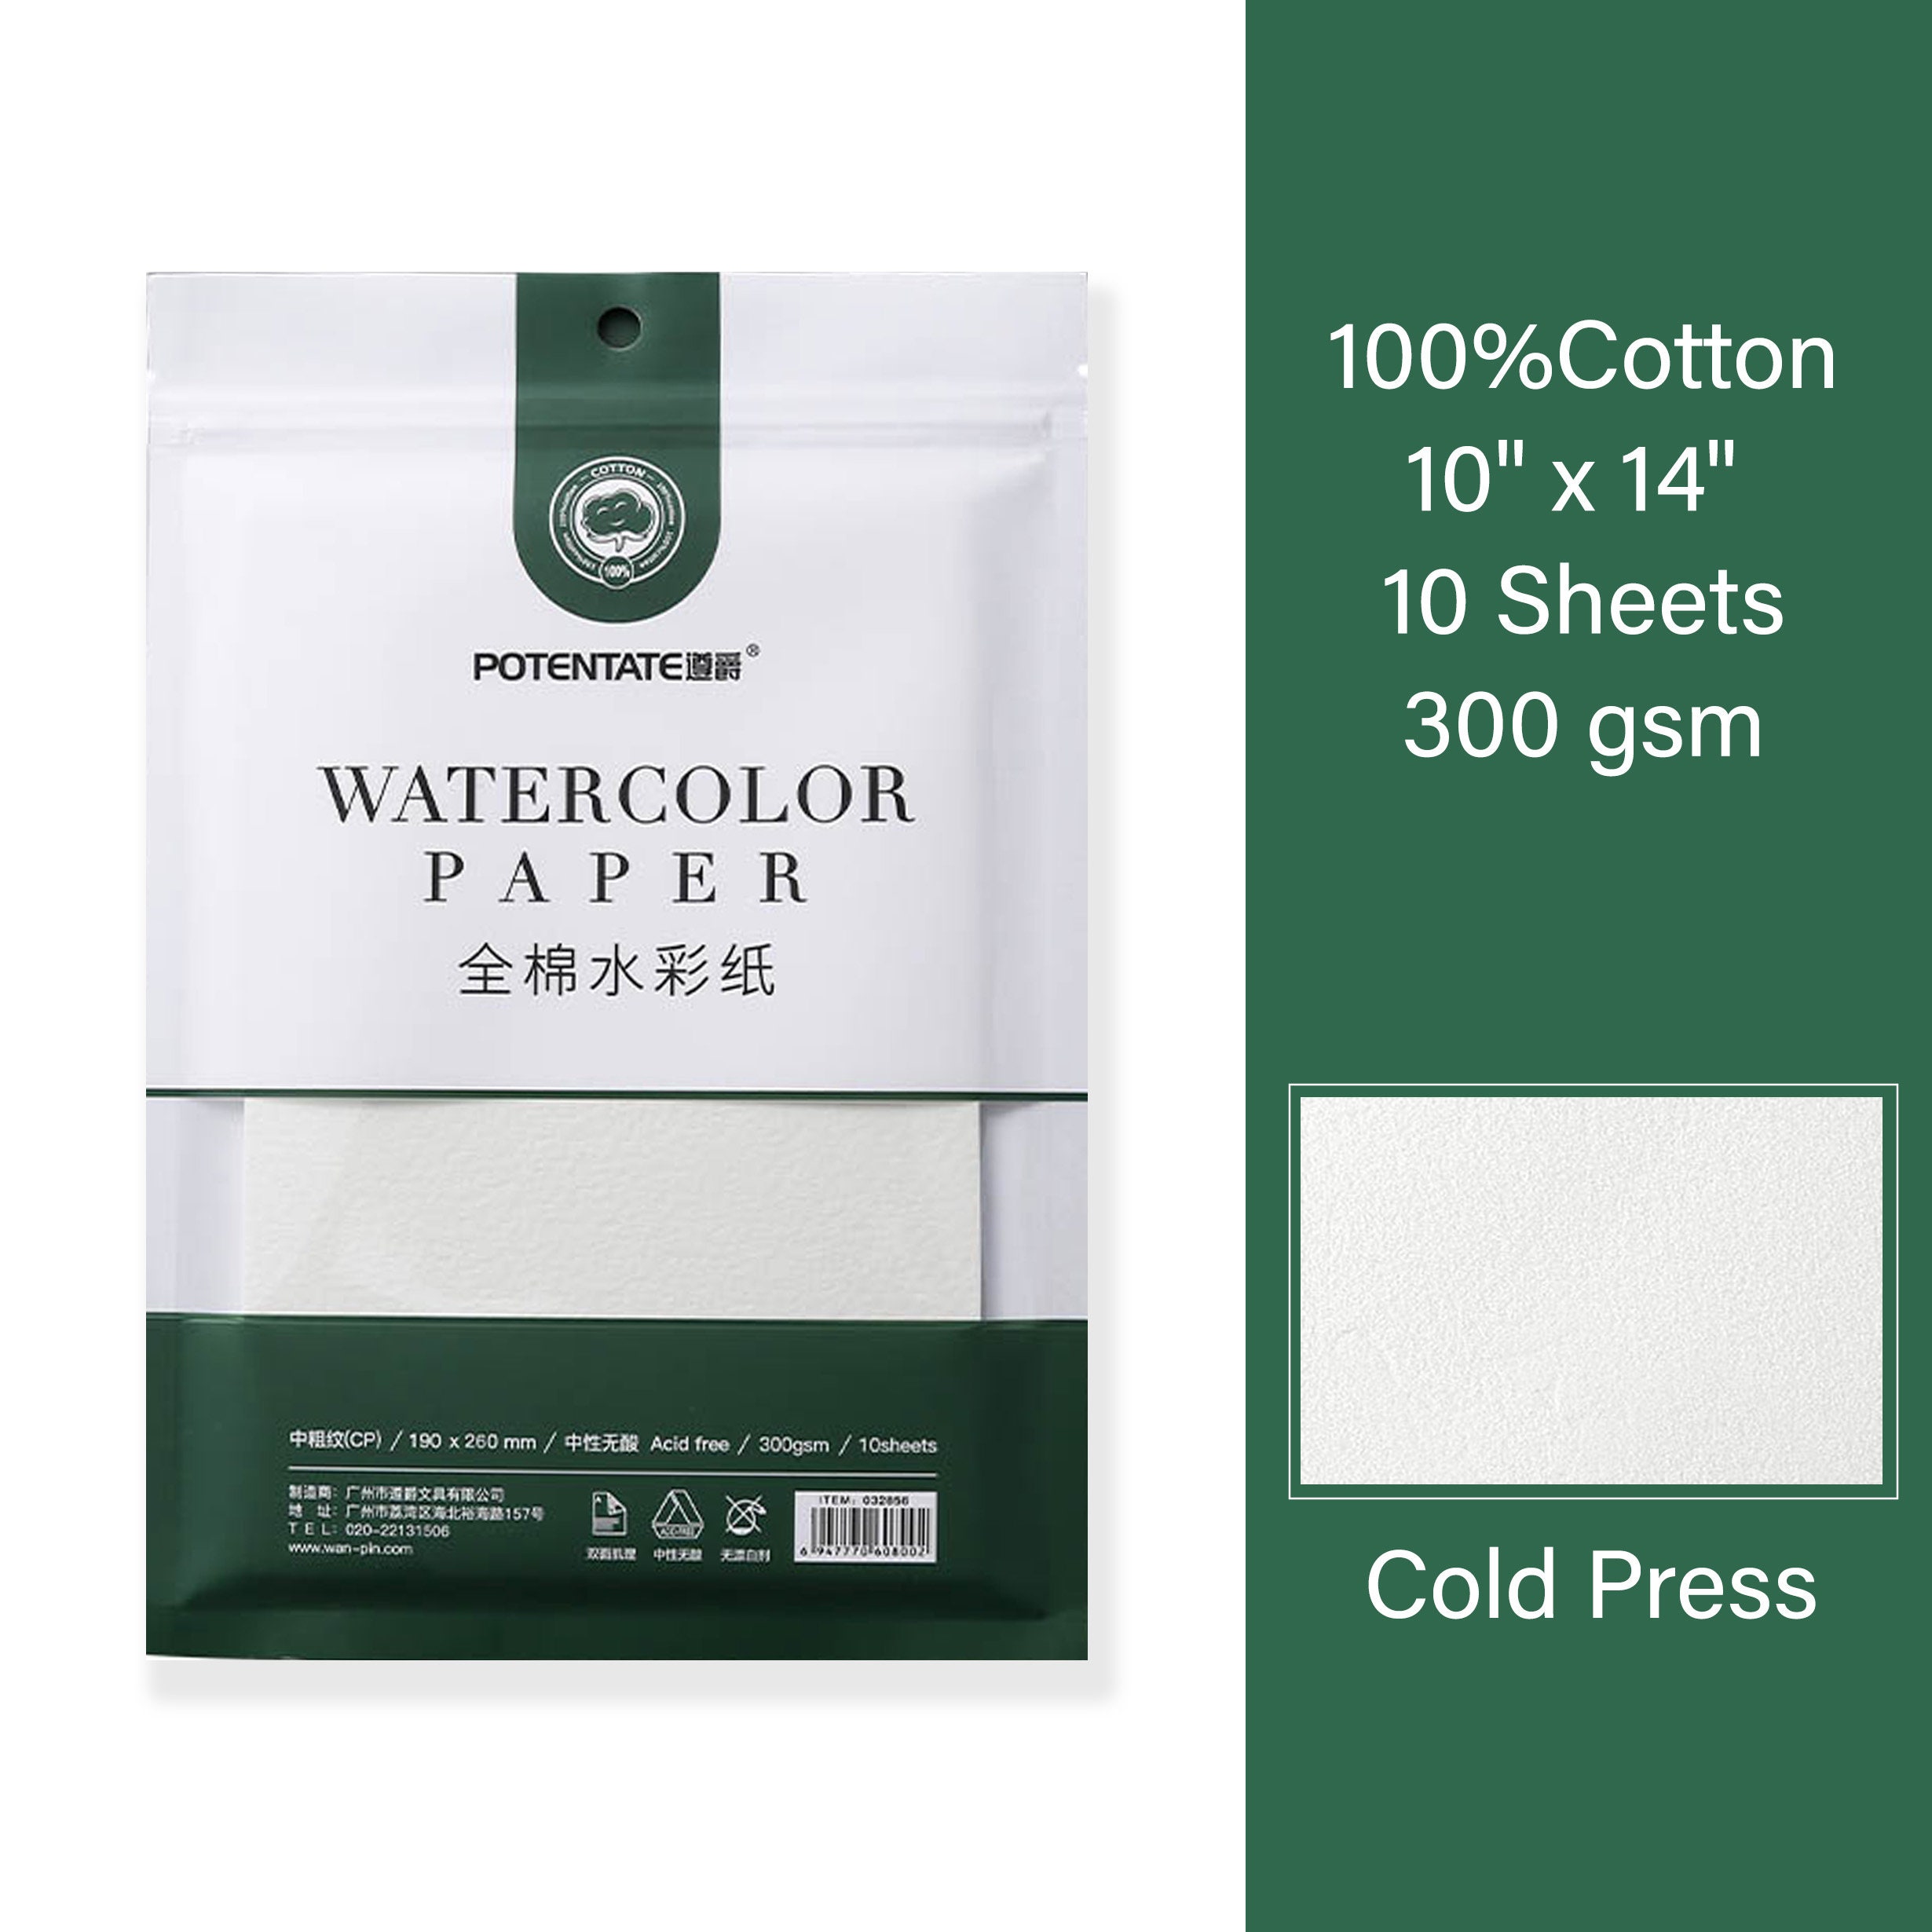 Arches Watercolor Pad 10x14-inch Natural White 100% Cotton Paper - 12 Sheet  Arches Hot Press Watercolor Paper 140 lb Pad - Arches Art Paper for